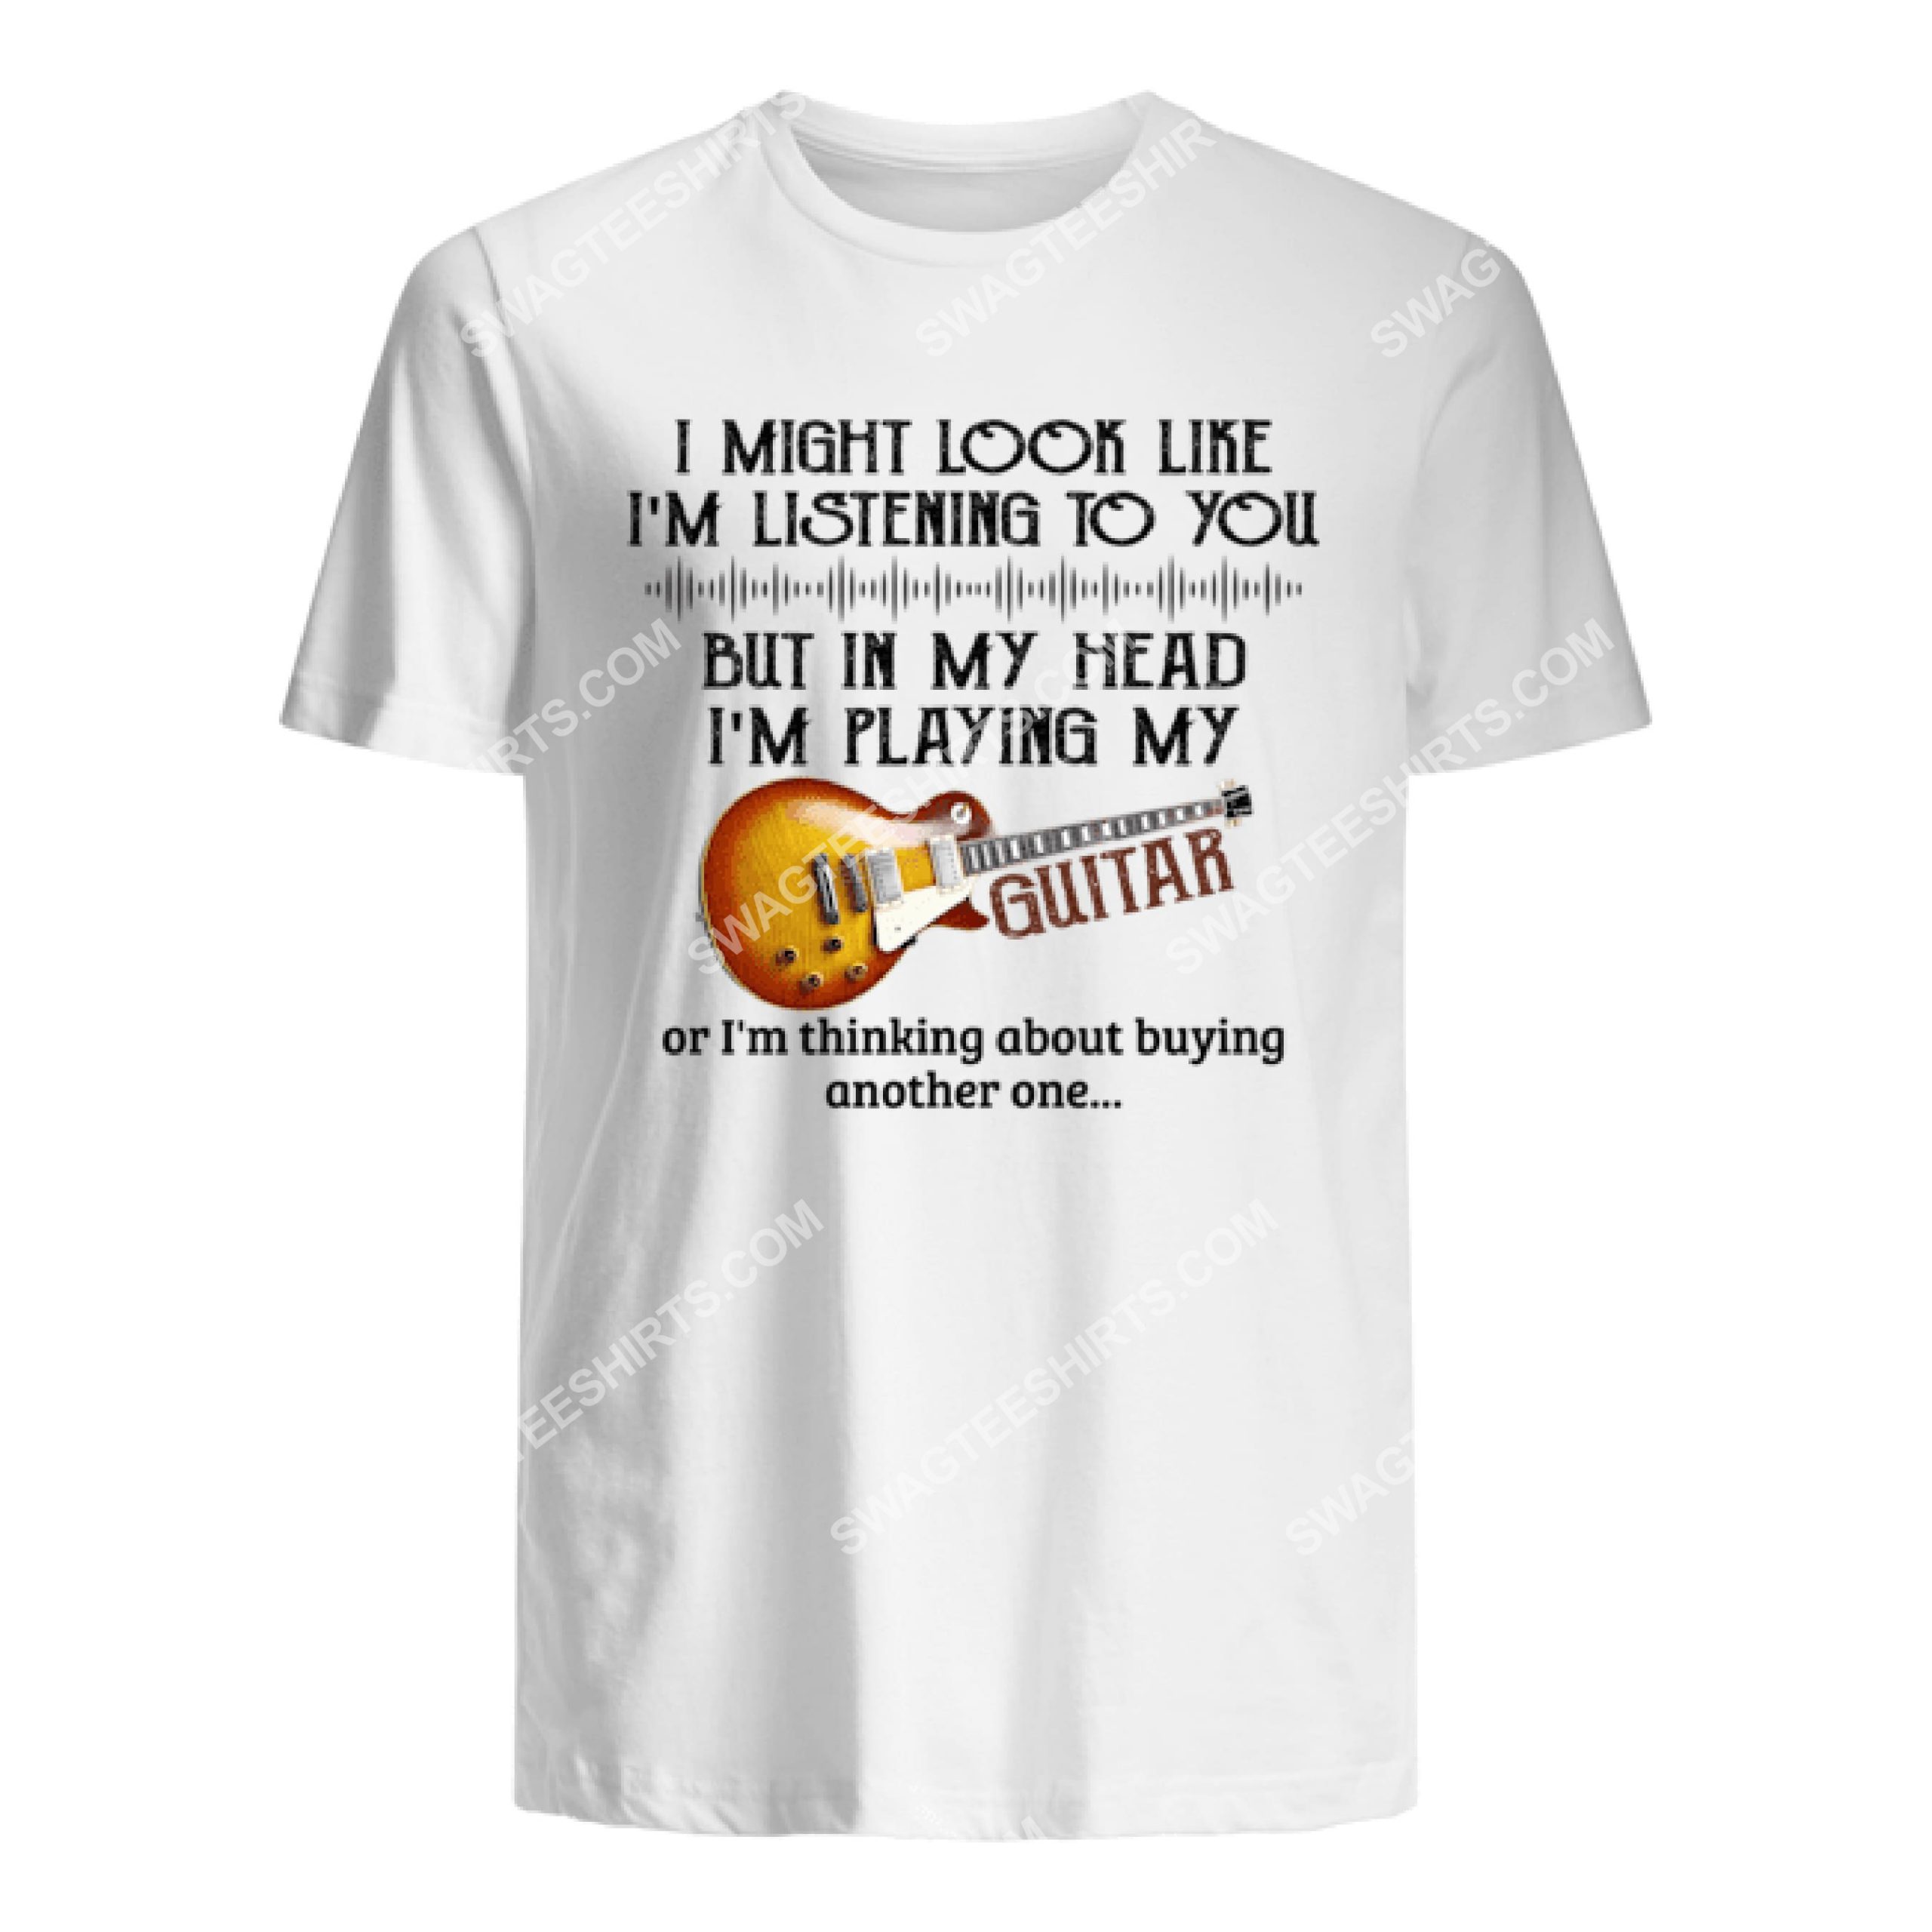 i might look like i'm listening to you but in my head i'm playing my guitar shirt 1(1)